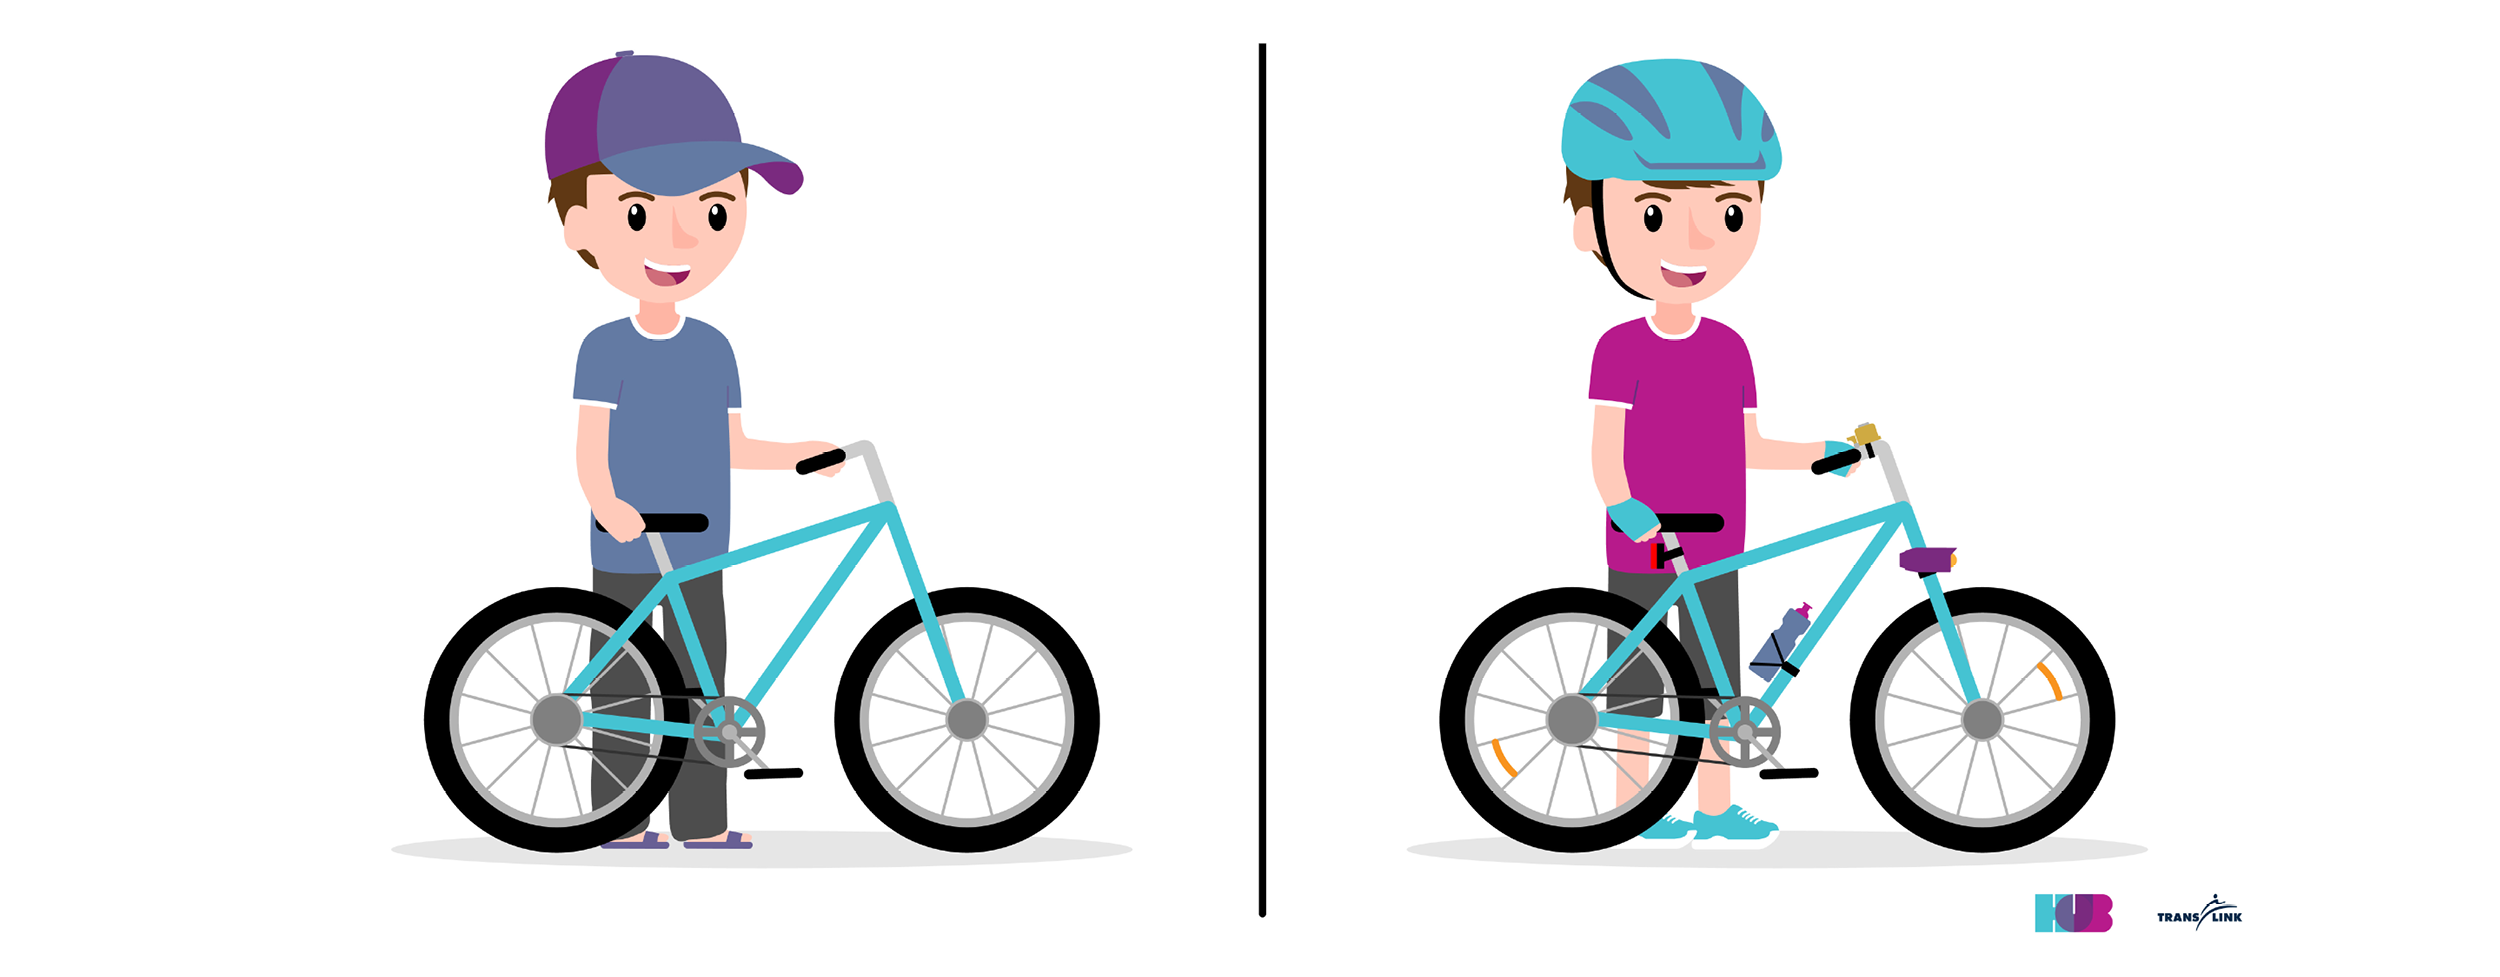 An illustration of two boys standing with their bikes. The boy on the left is not ready to ride yet because he does not have his gear on. The boy on the right is ready to ride because he has his gear on, including a helmet, gloves, water bottle holder, front light and rear light.